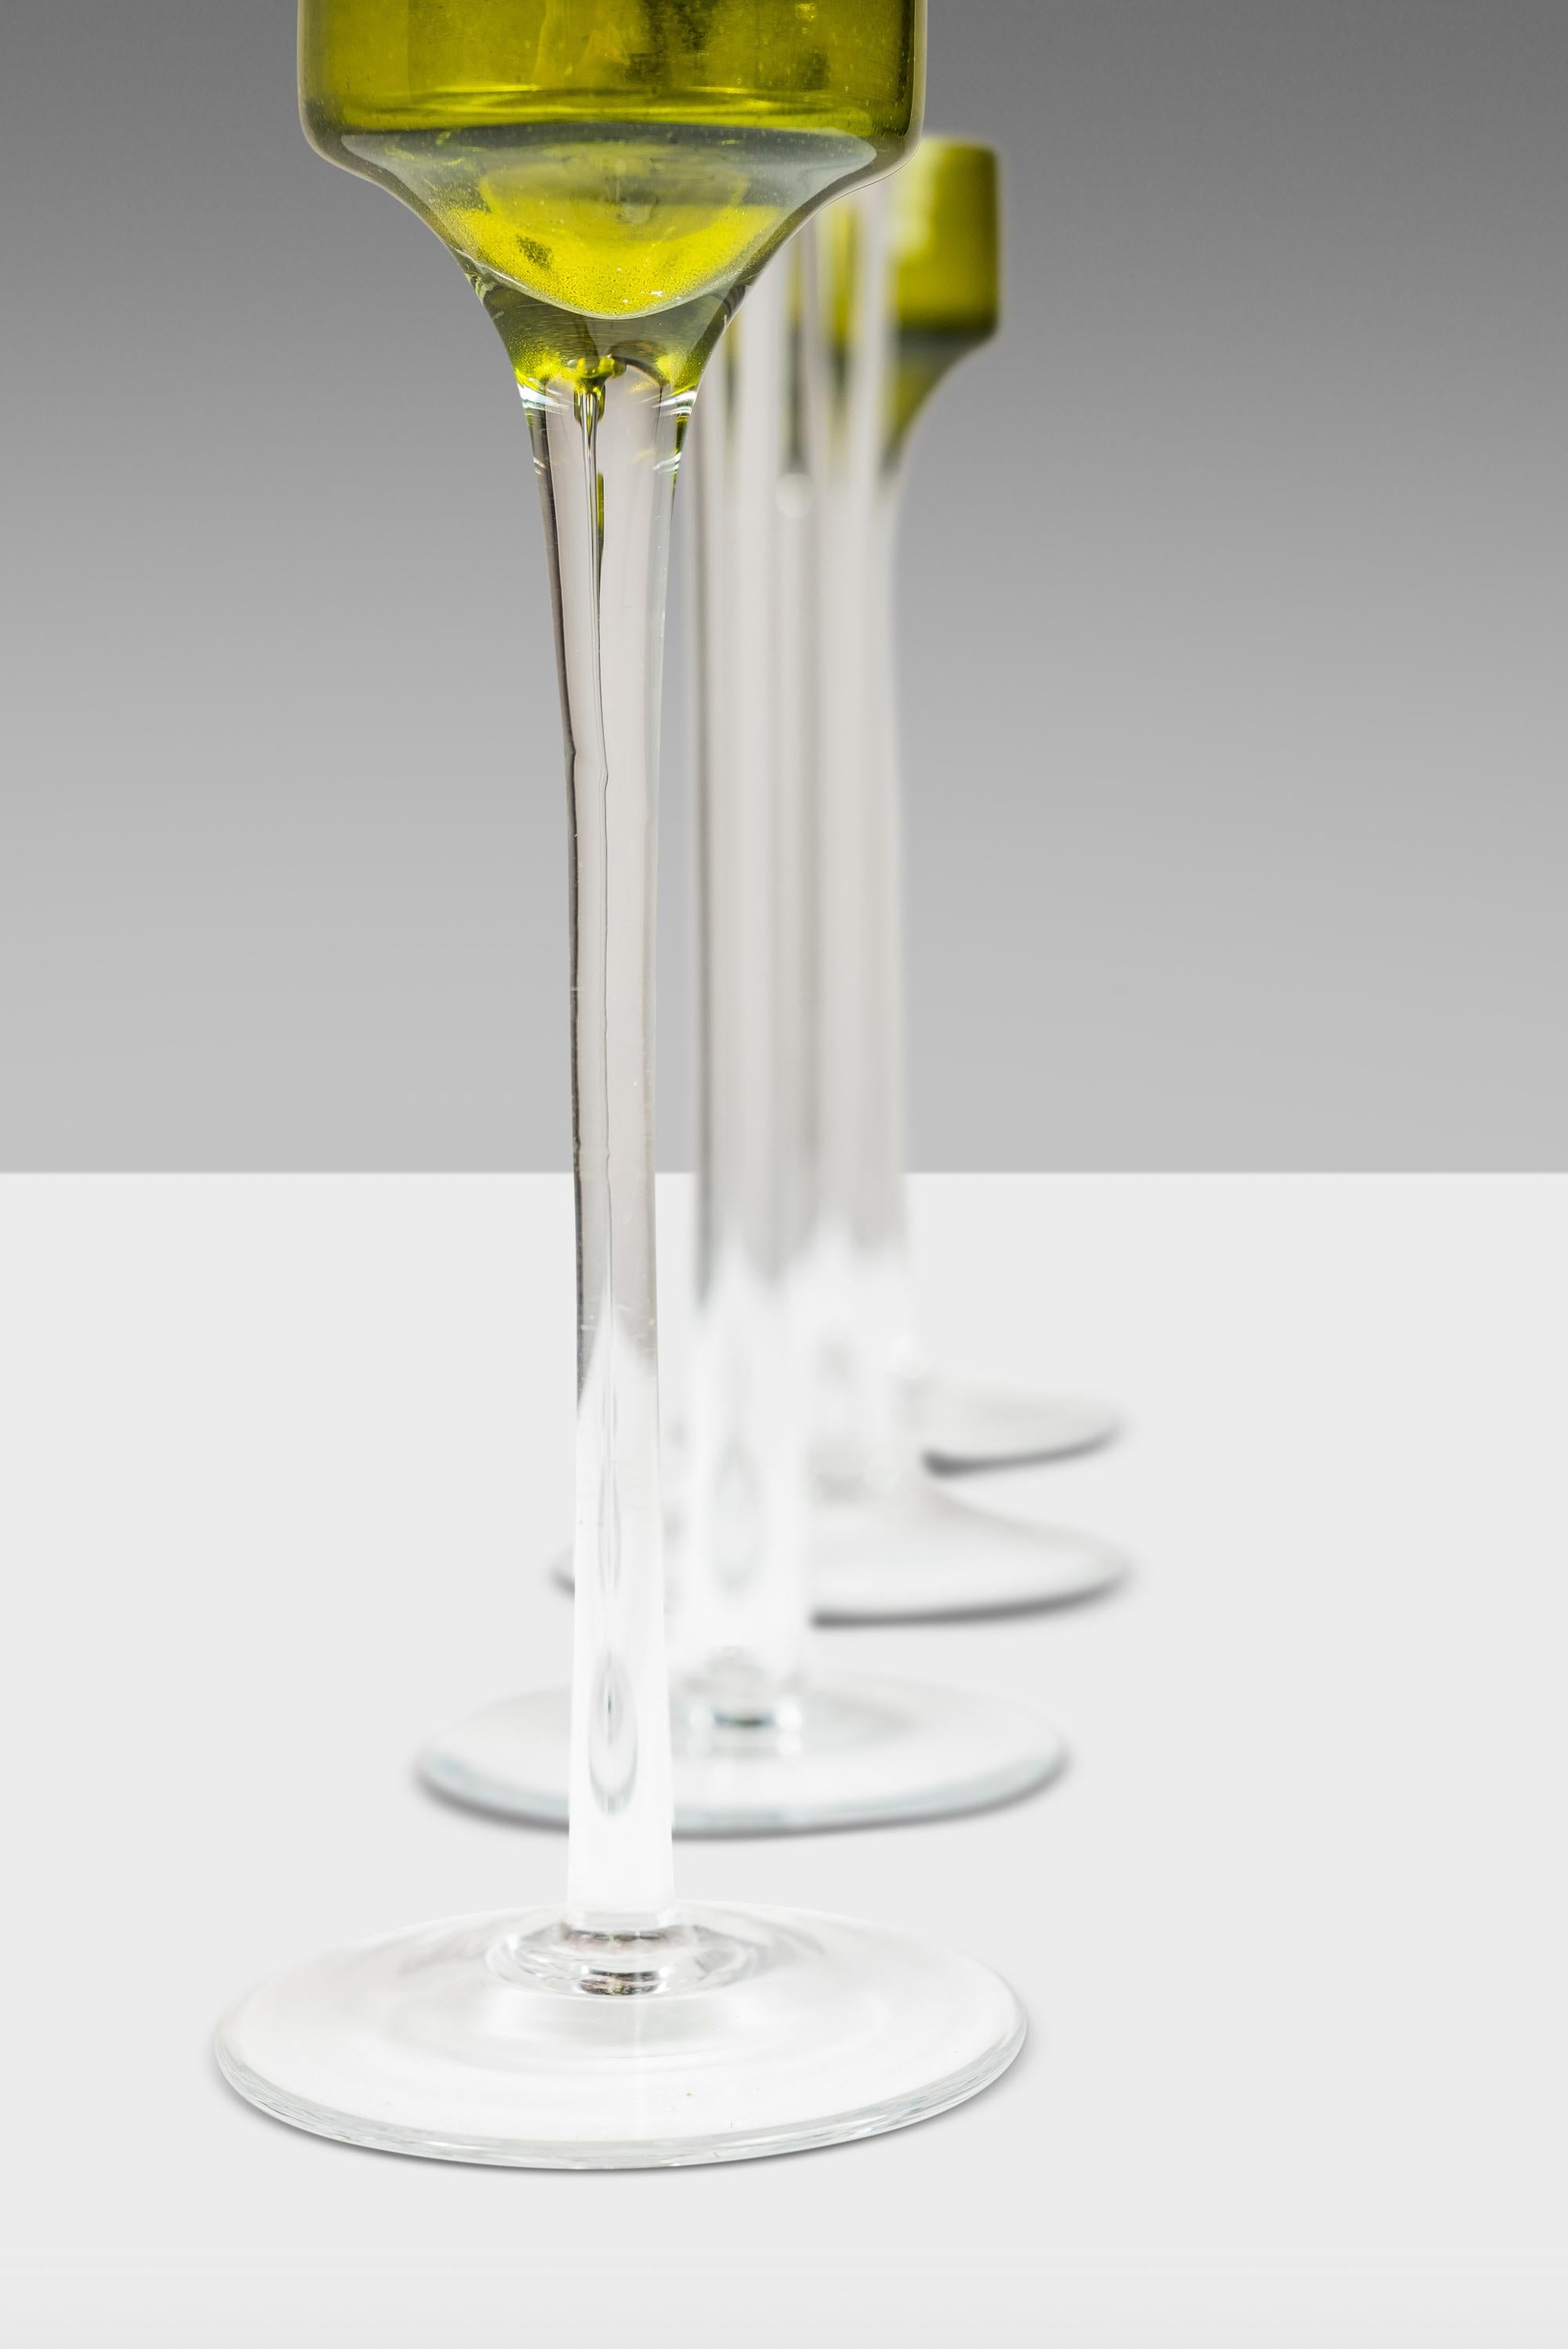 Set of 4 Italian Modern Elongated Two-Tone Blown Glass Candlestick Holders, 1970 For Sale 1